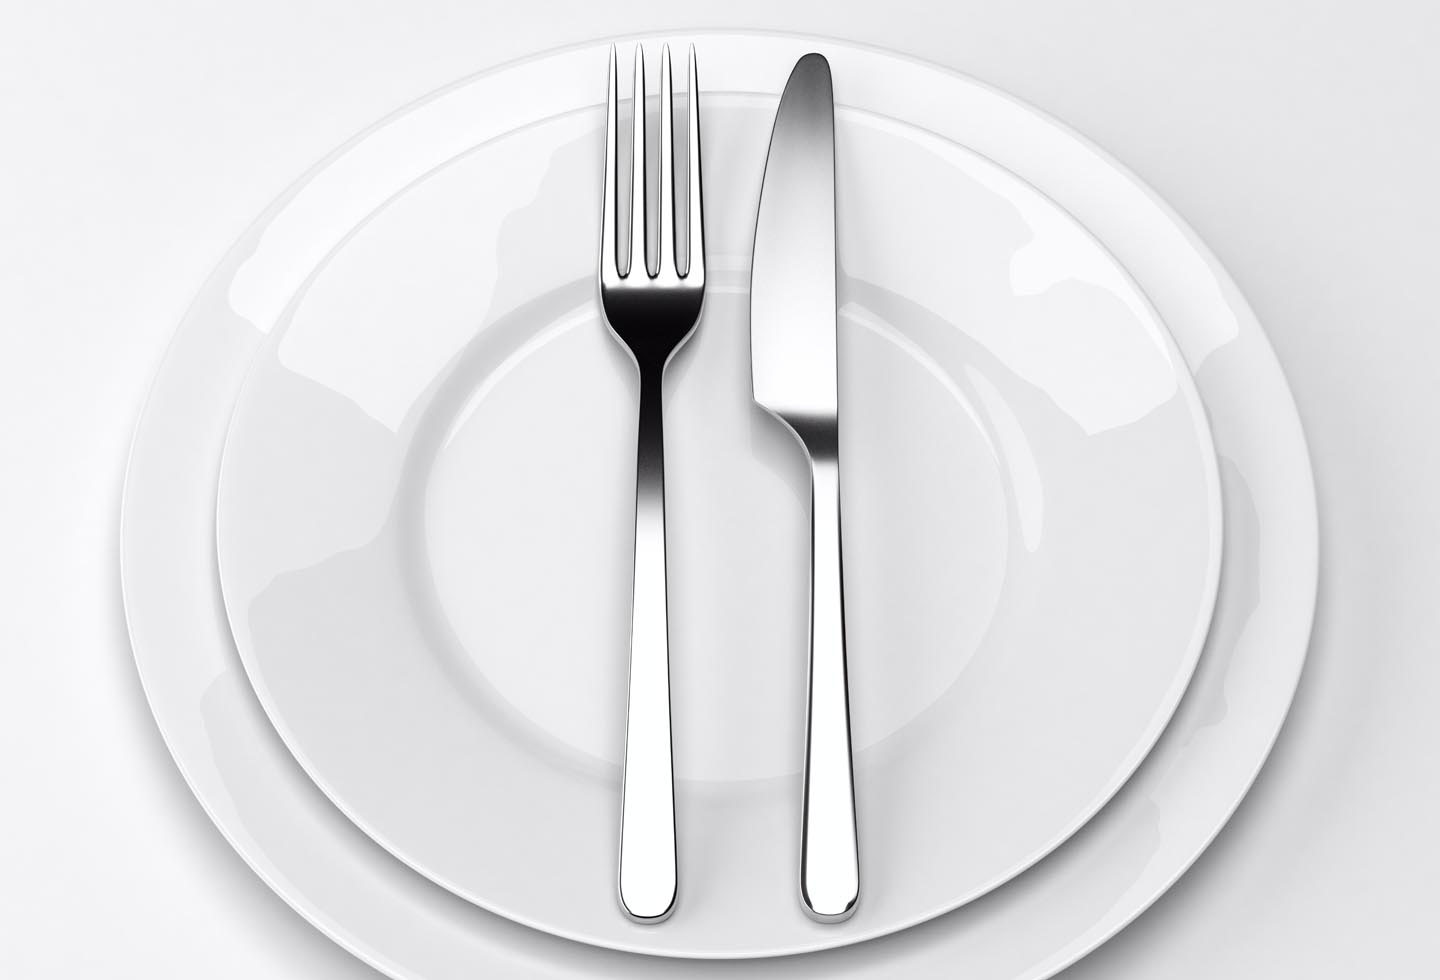 Fasting can improve Mental Health